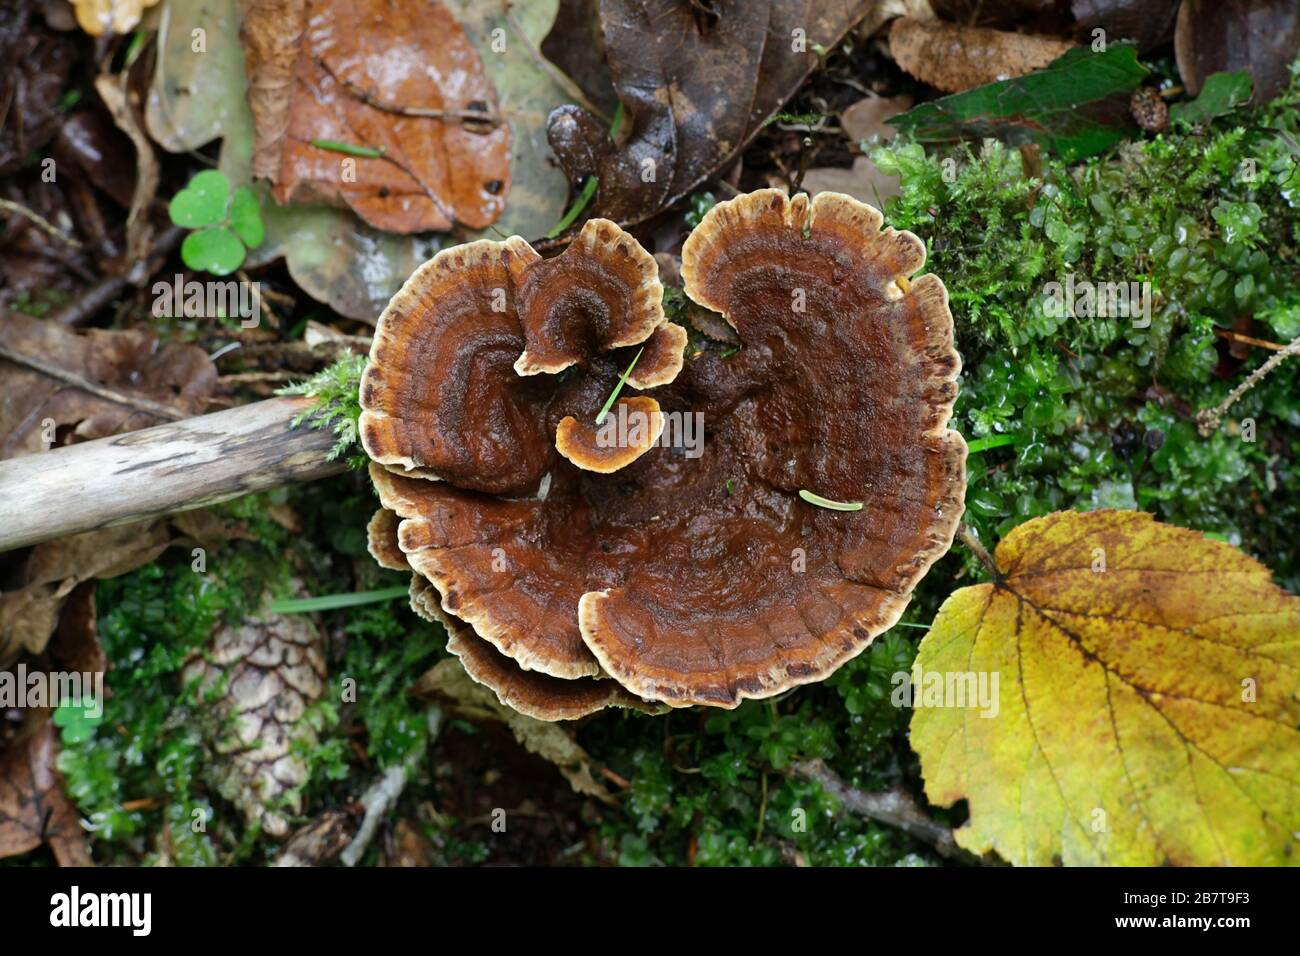 Pelloporus tomentosus, known as Velvet Rosette, a polypory fungus from Finland Stock Photo